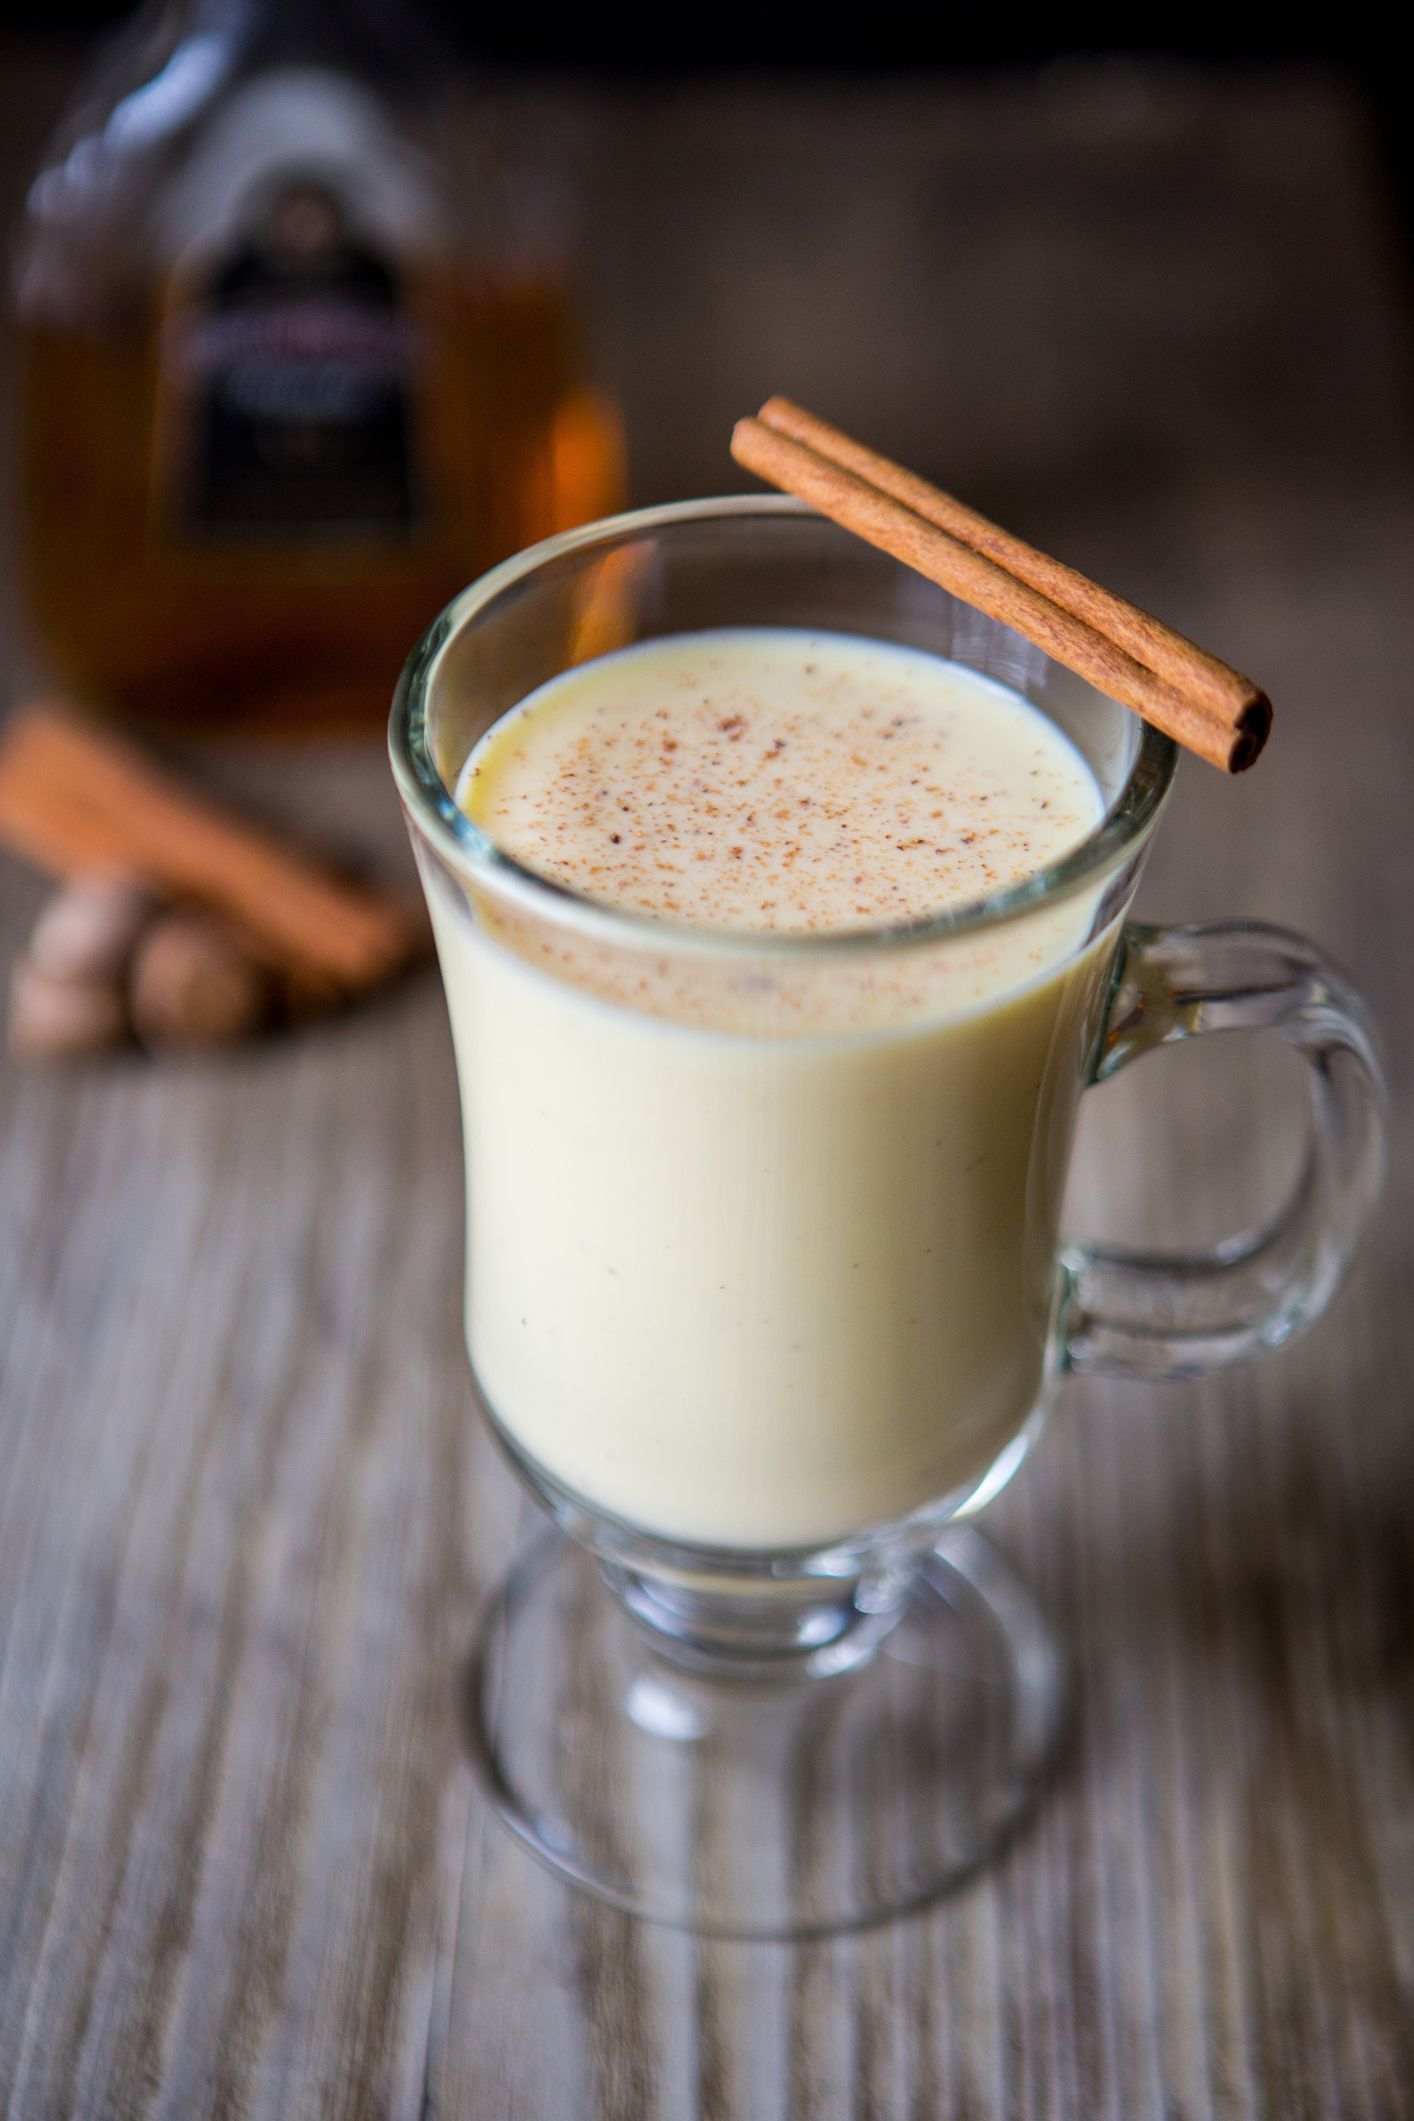 Rompope Recipe for Mexico's Version of Eggnog